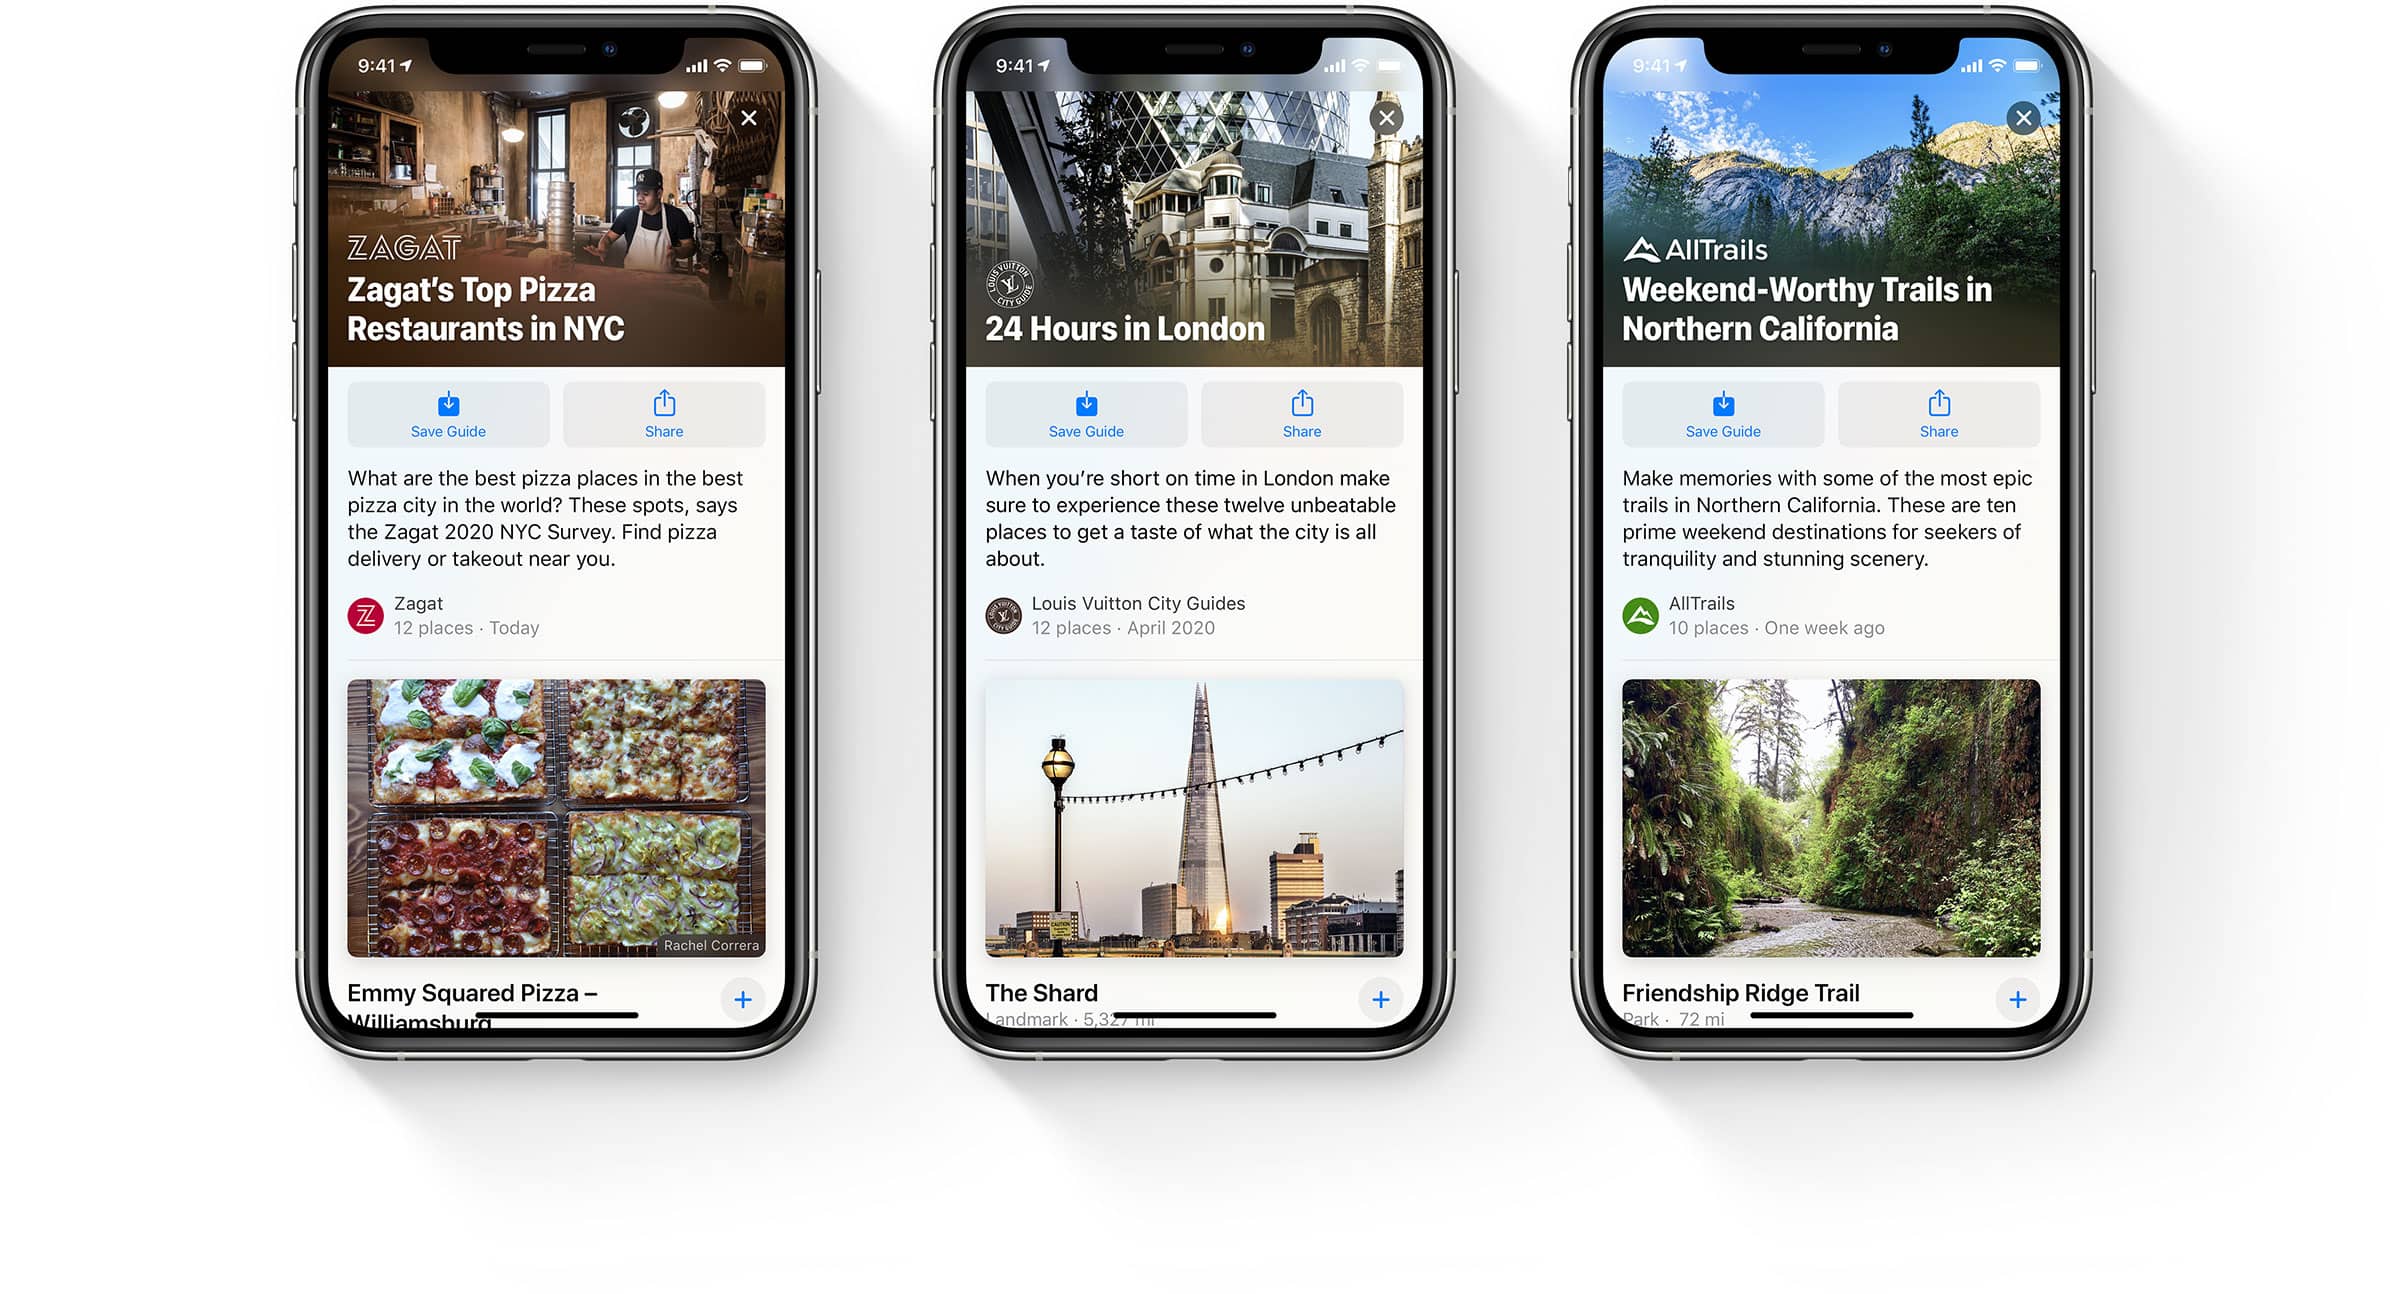 Louis Vuitton City Guides are now on Apple Maps